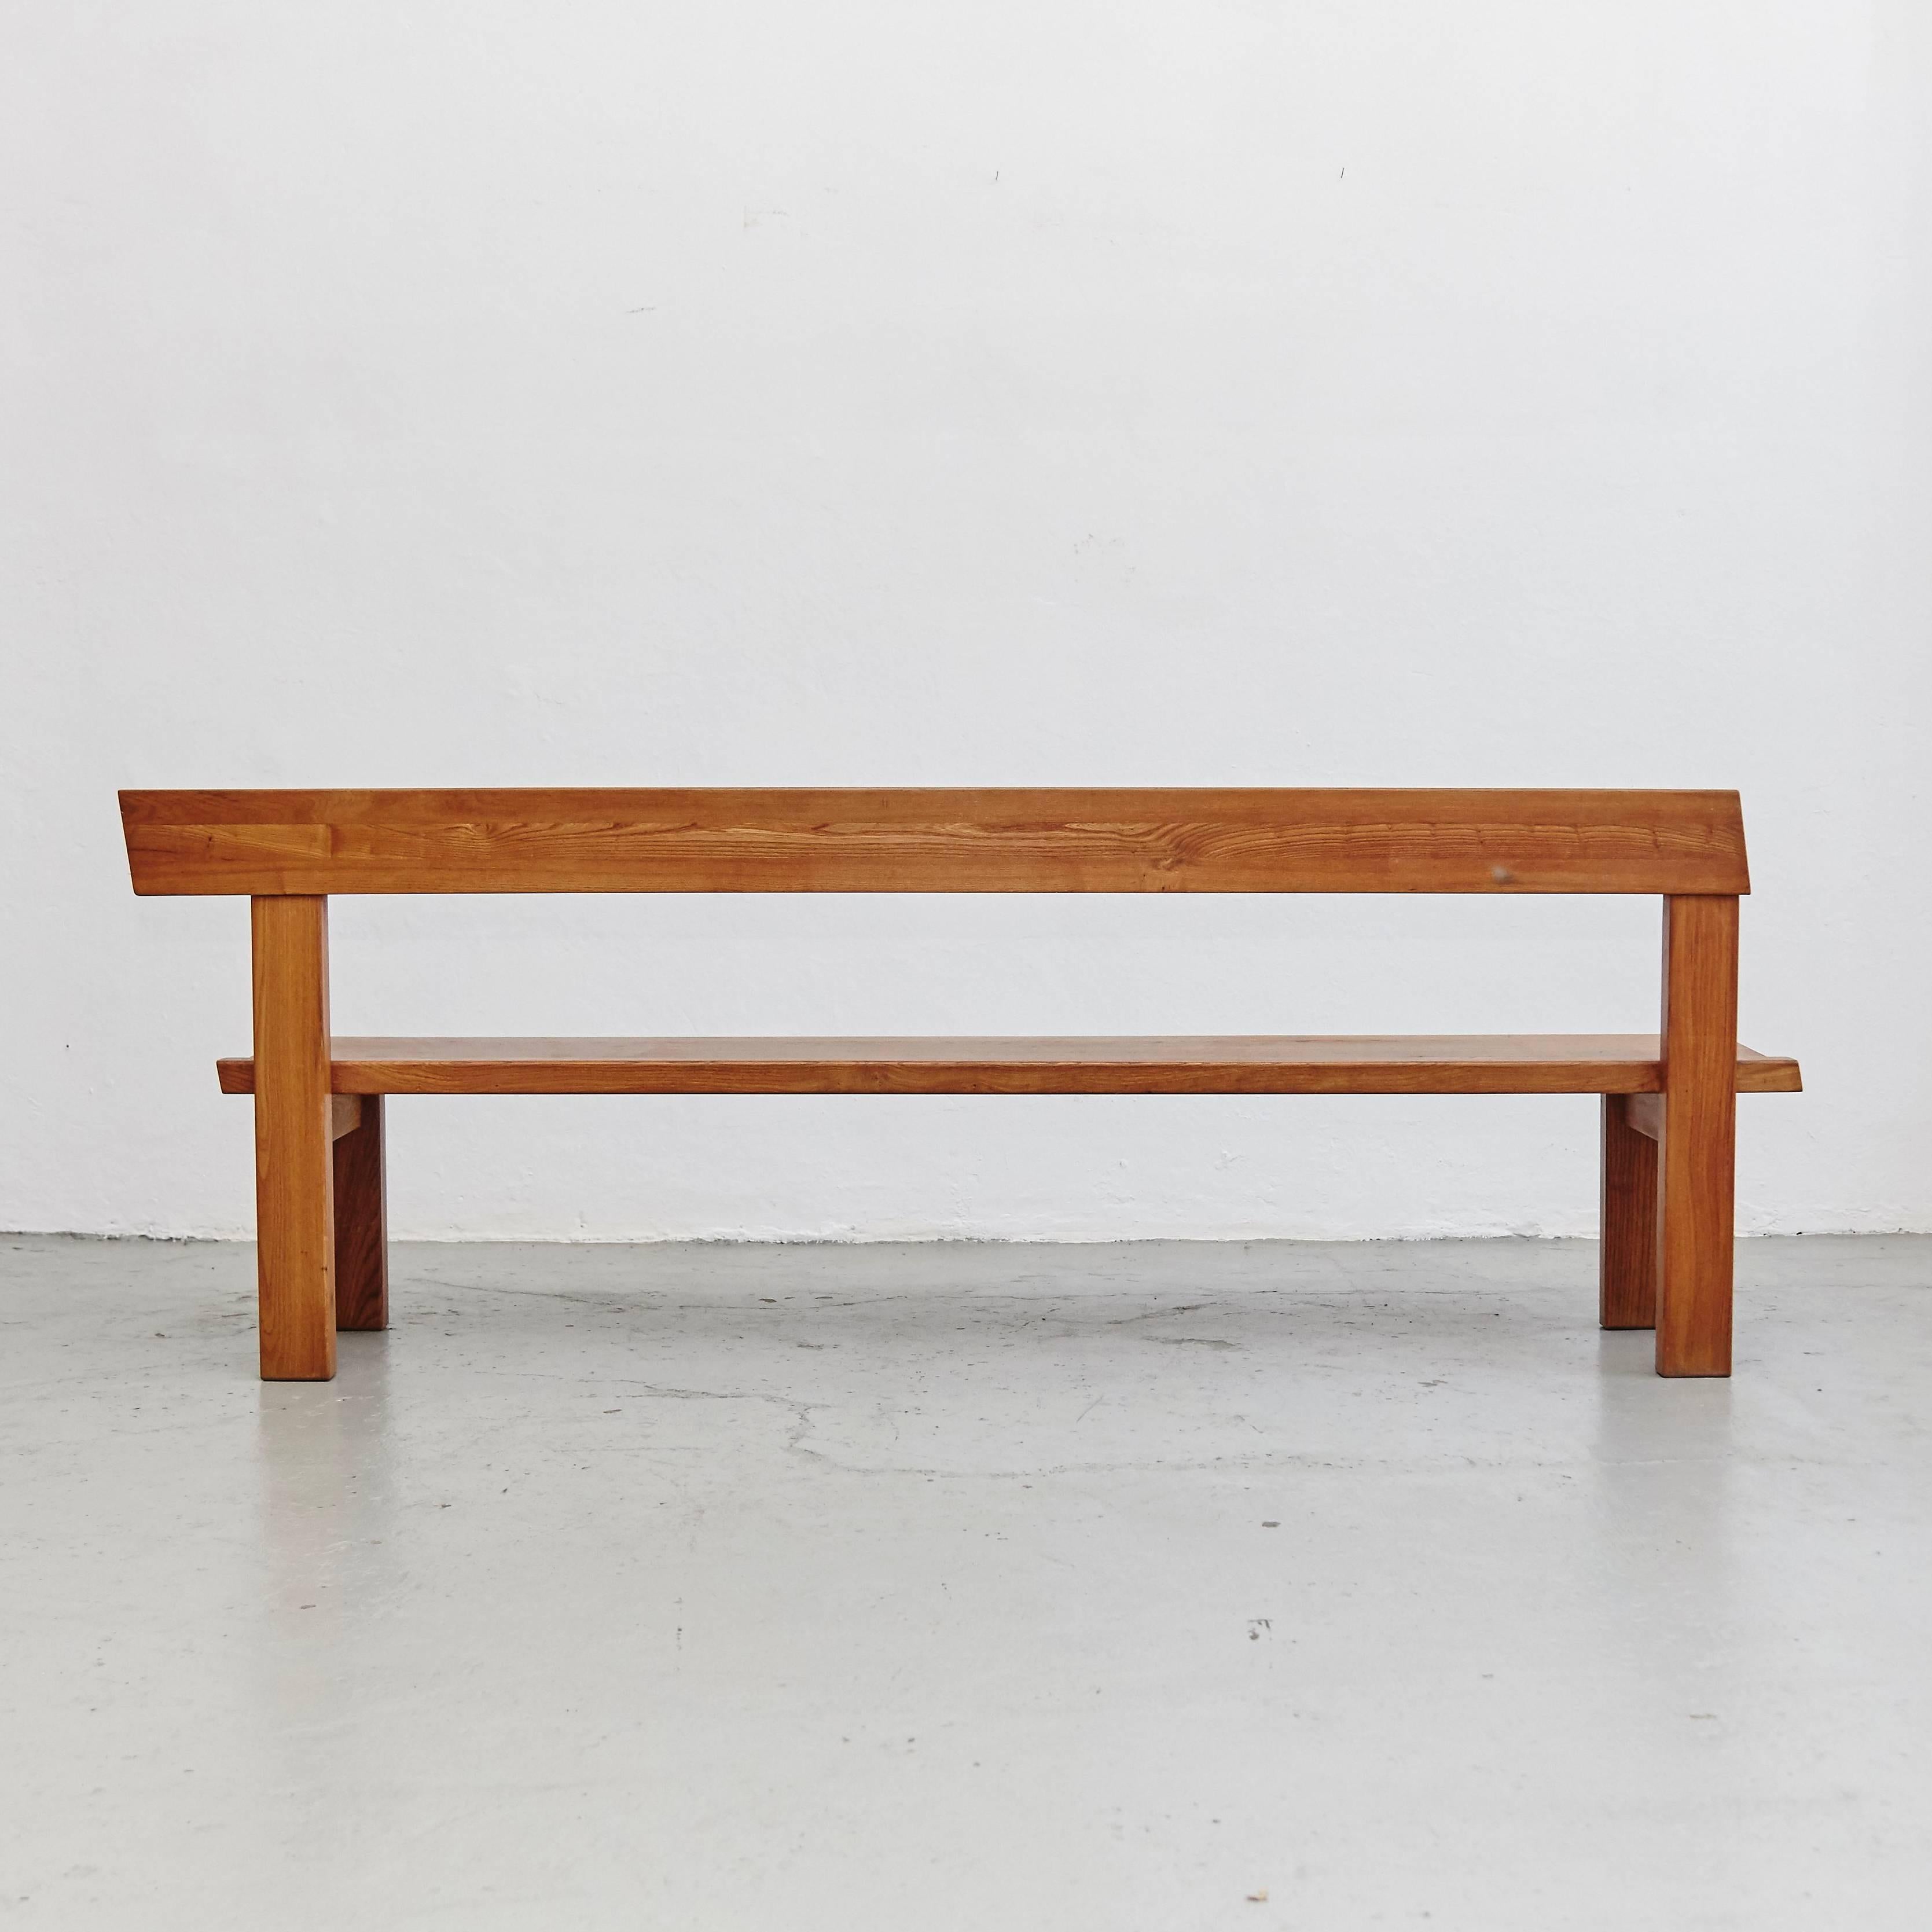 Large bench designed by Pierre Chapo, manufactured in France, 1960s.

Solid elmwood.

In good original condition, with minor wear consistent with age and use, preserving a beautiful patina.

Pierre Chapo is born in a family of craftsmen. After